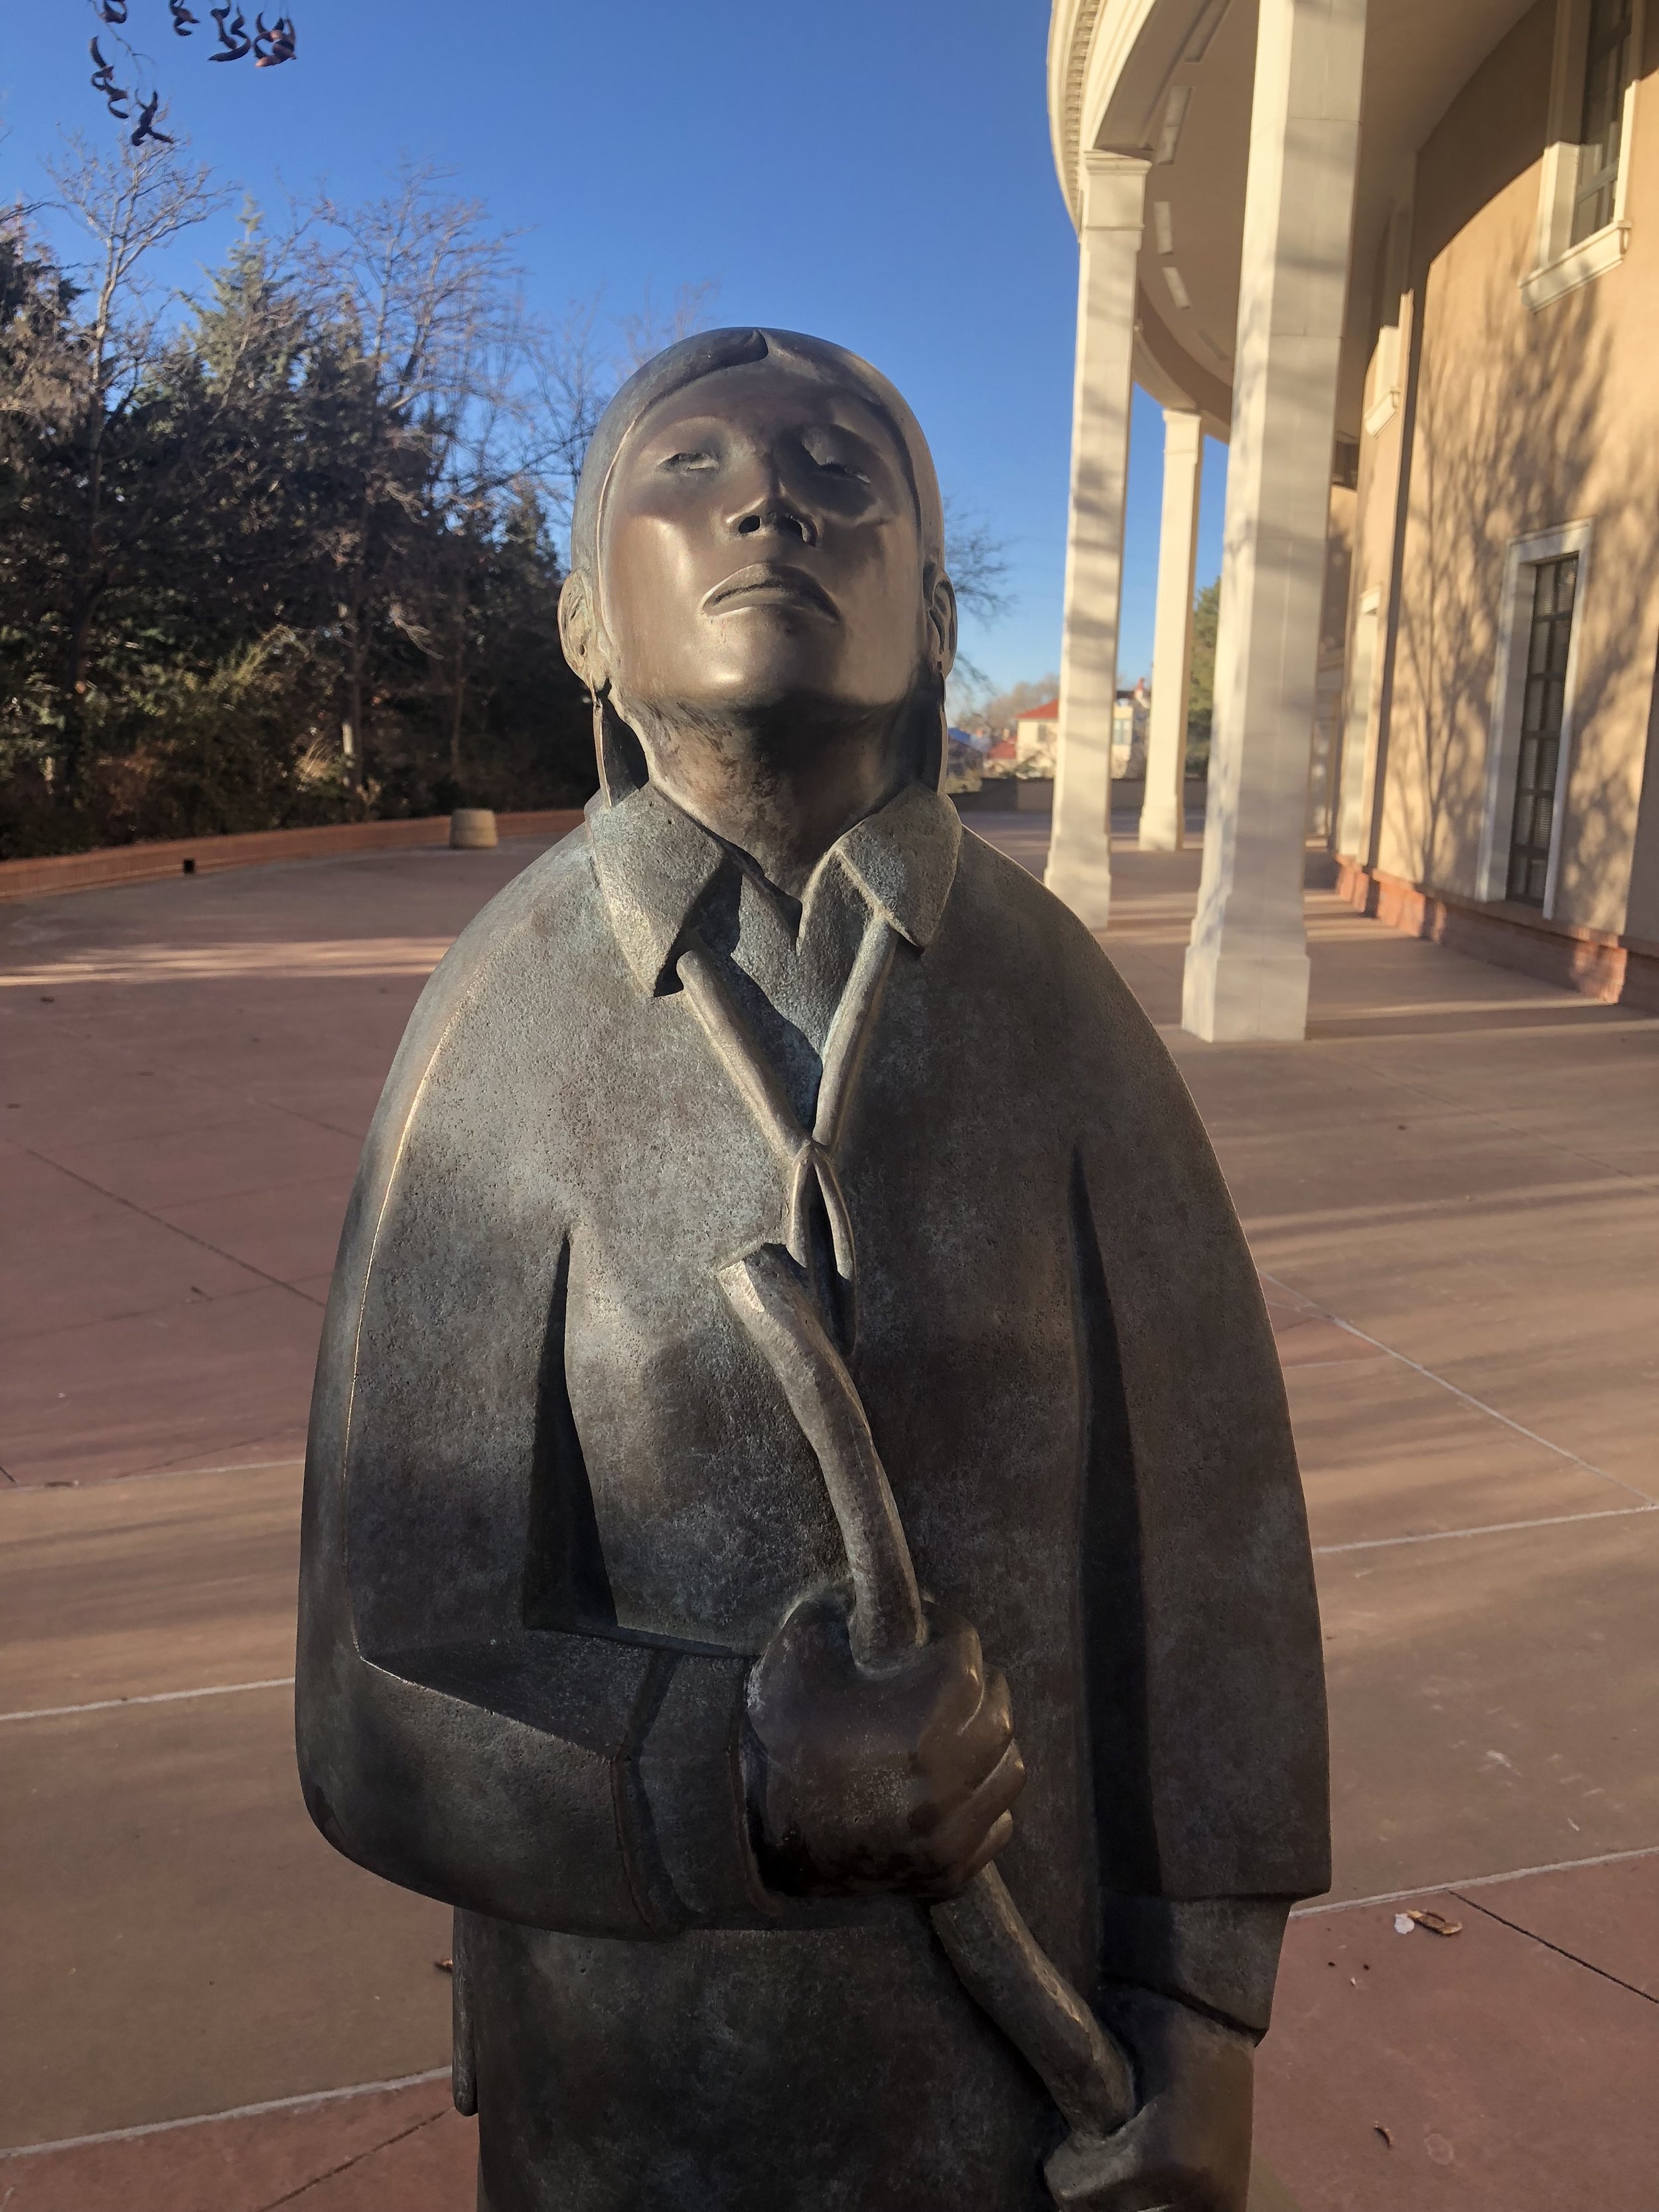  “Raindrops” by Allan Houser Haozous, NM State Capitol 